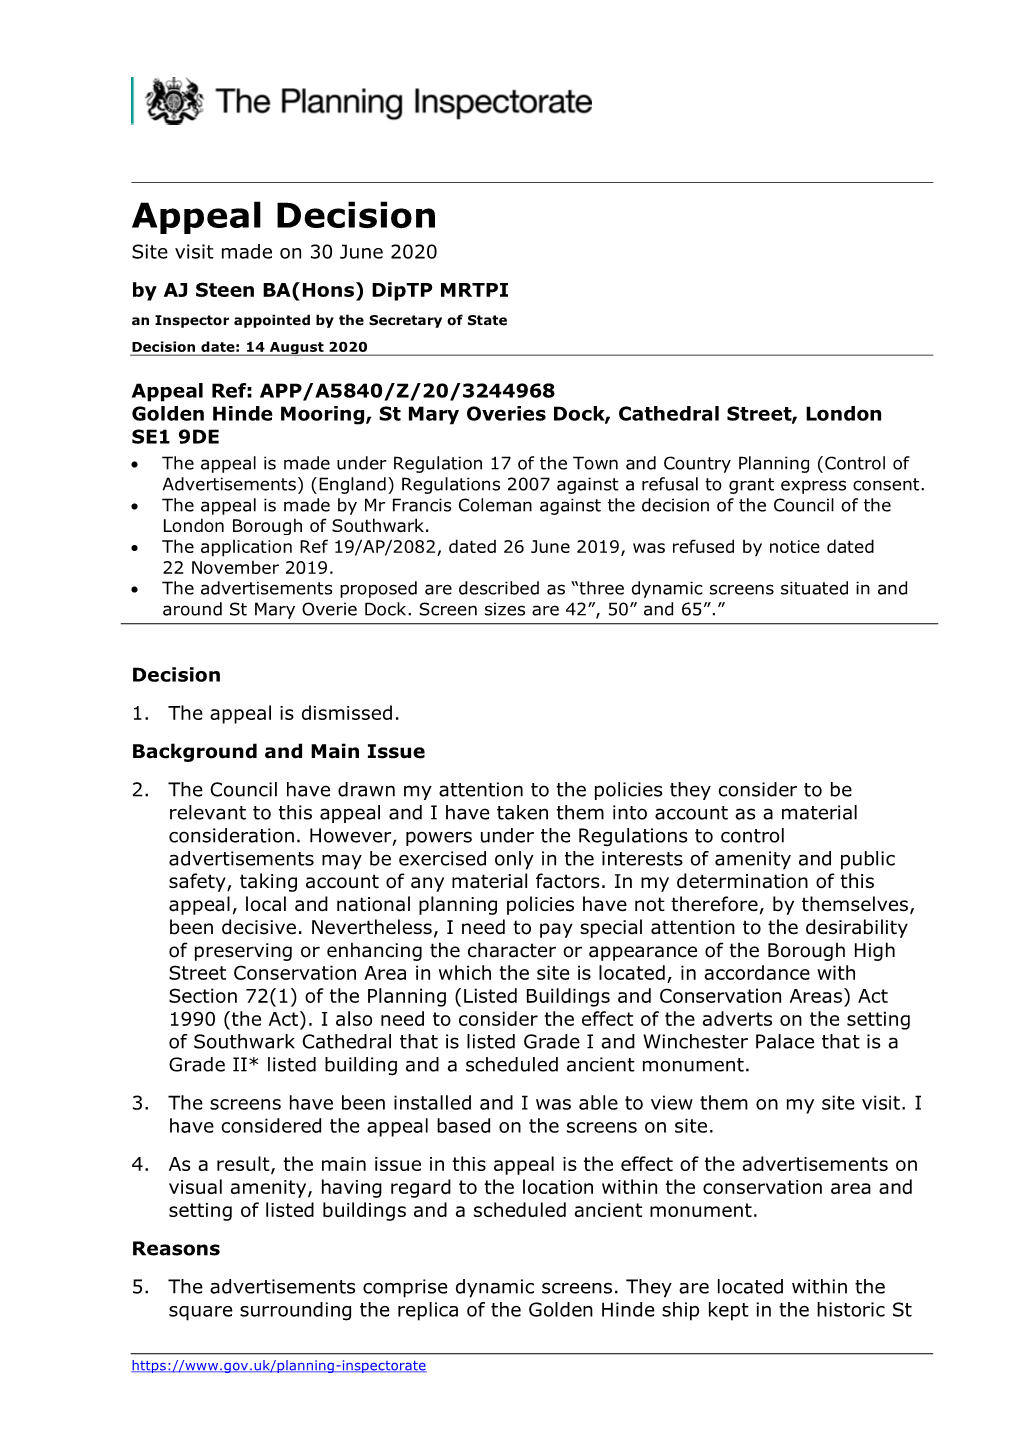 Appeal Decision Site Visit Made on 30 June 2020 by AJ Steen BA(Hons) Diptp MRTPI an Inspector Appointed by the Secretary of State Decision Date: 14 August 2020